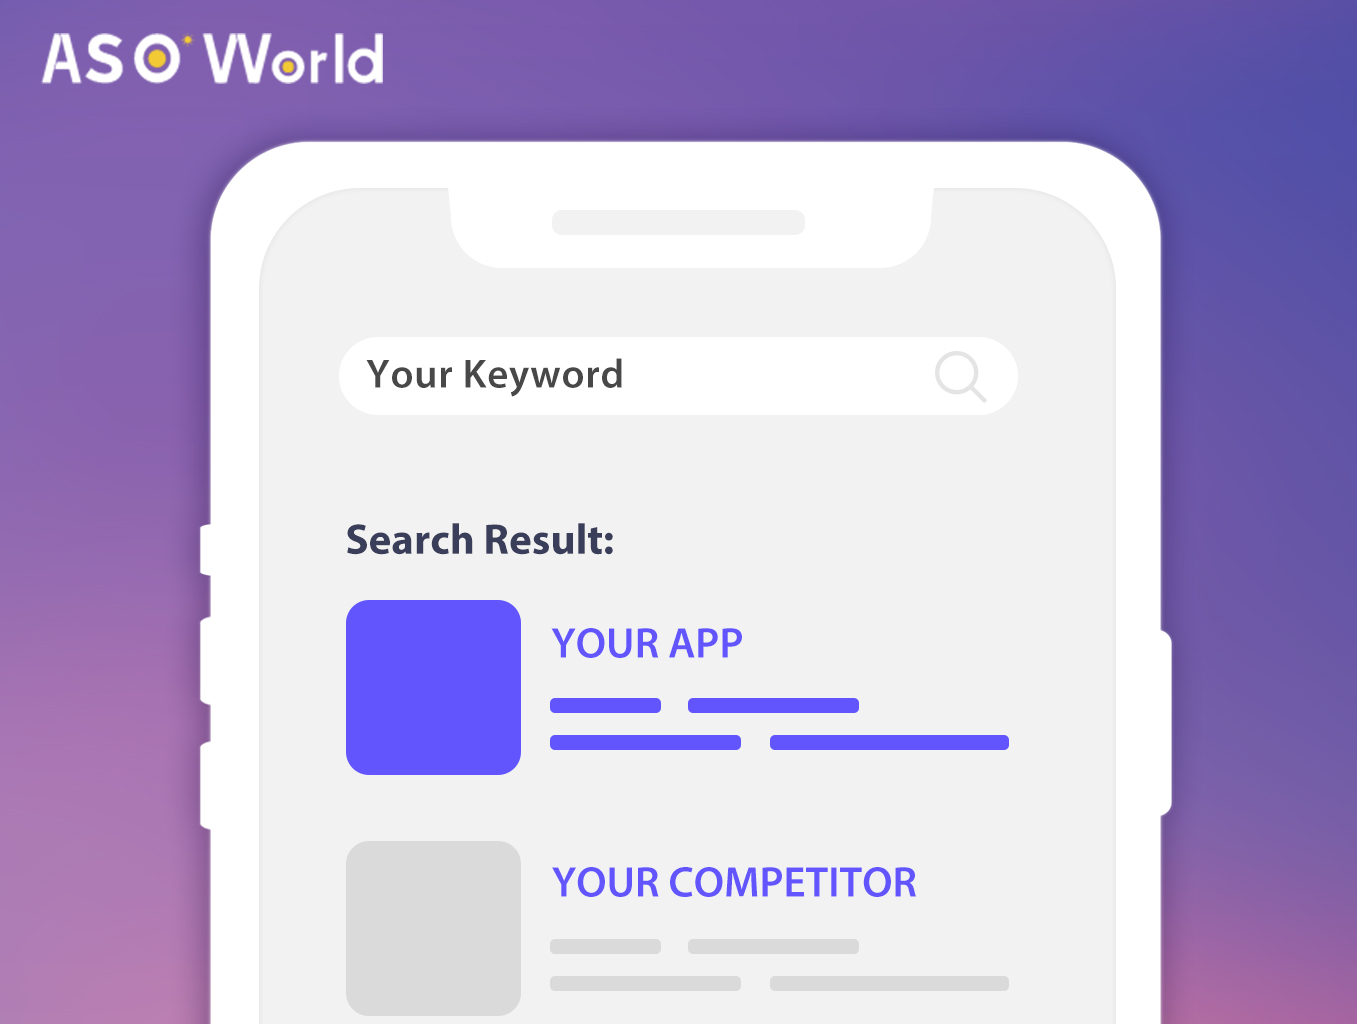 App Store Growth Hacking: Knowing Keyword Ranking Acquisition, How to Maximize Search Traffic Acquisition of New Apps?